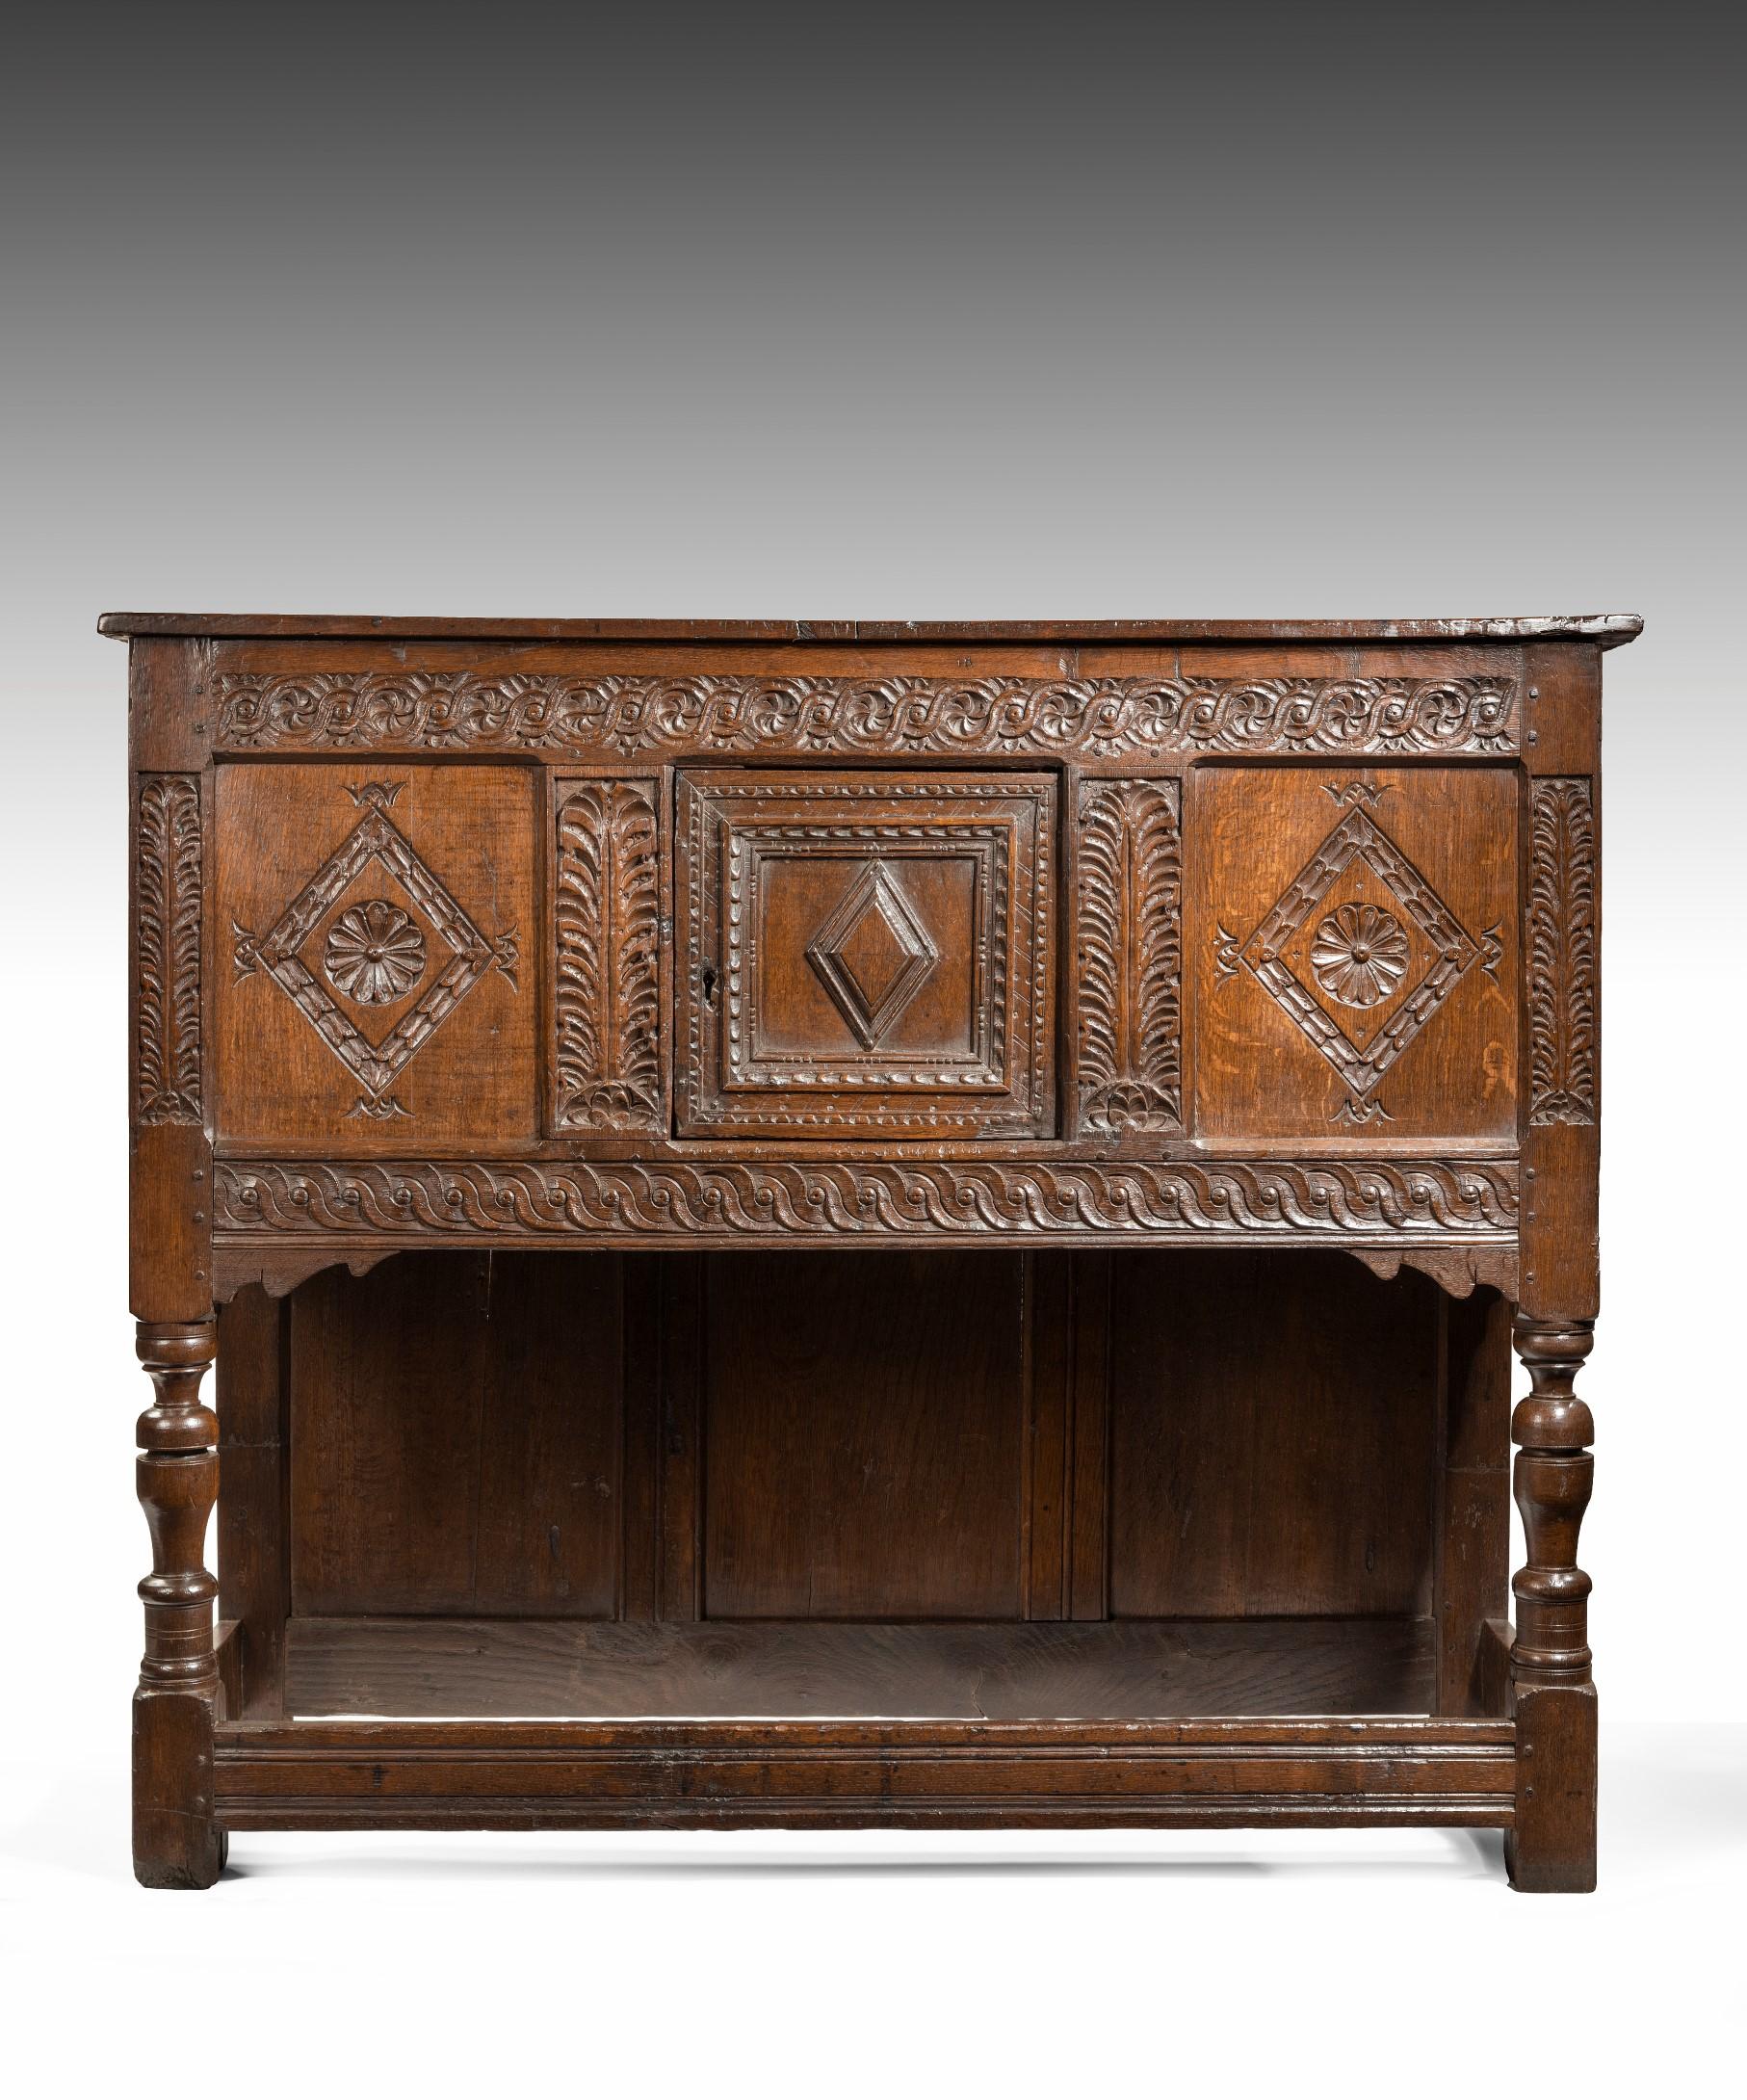 A handsome 17th century Charles II oak livery cupboard with wonderfully bold carving; the cupboard's boarded top above a three panelled front with a central door and raised on cup and cover turned legs united by moulded stretchers. The livery